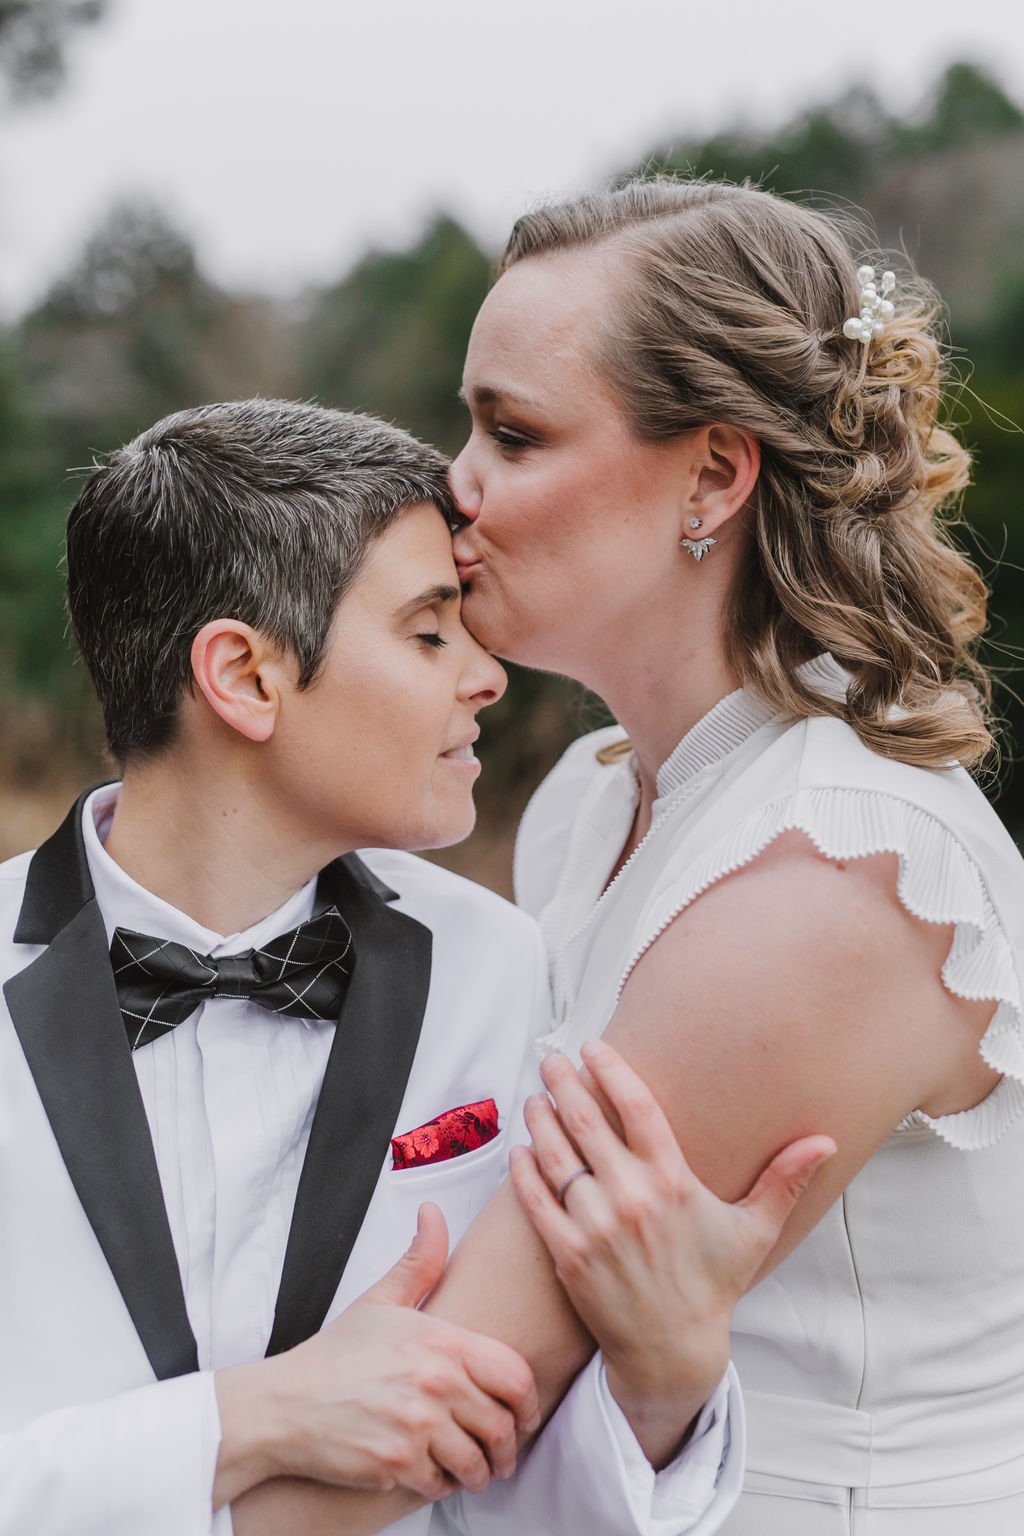 Tobey+Lindsey'sWedding-EmilyTebbettsPhotography-59 Intimate Queer Lesbian LGBTQ Winter Boston Arboretum Jamaica Plain Roslindale Wedding at the Milky Way Lounge and Restaurant in Massachusetts new england by queer elopement photographer .jpg